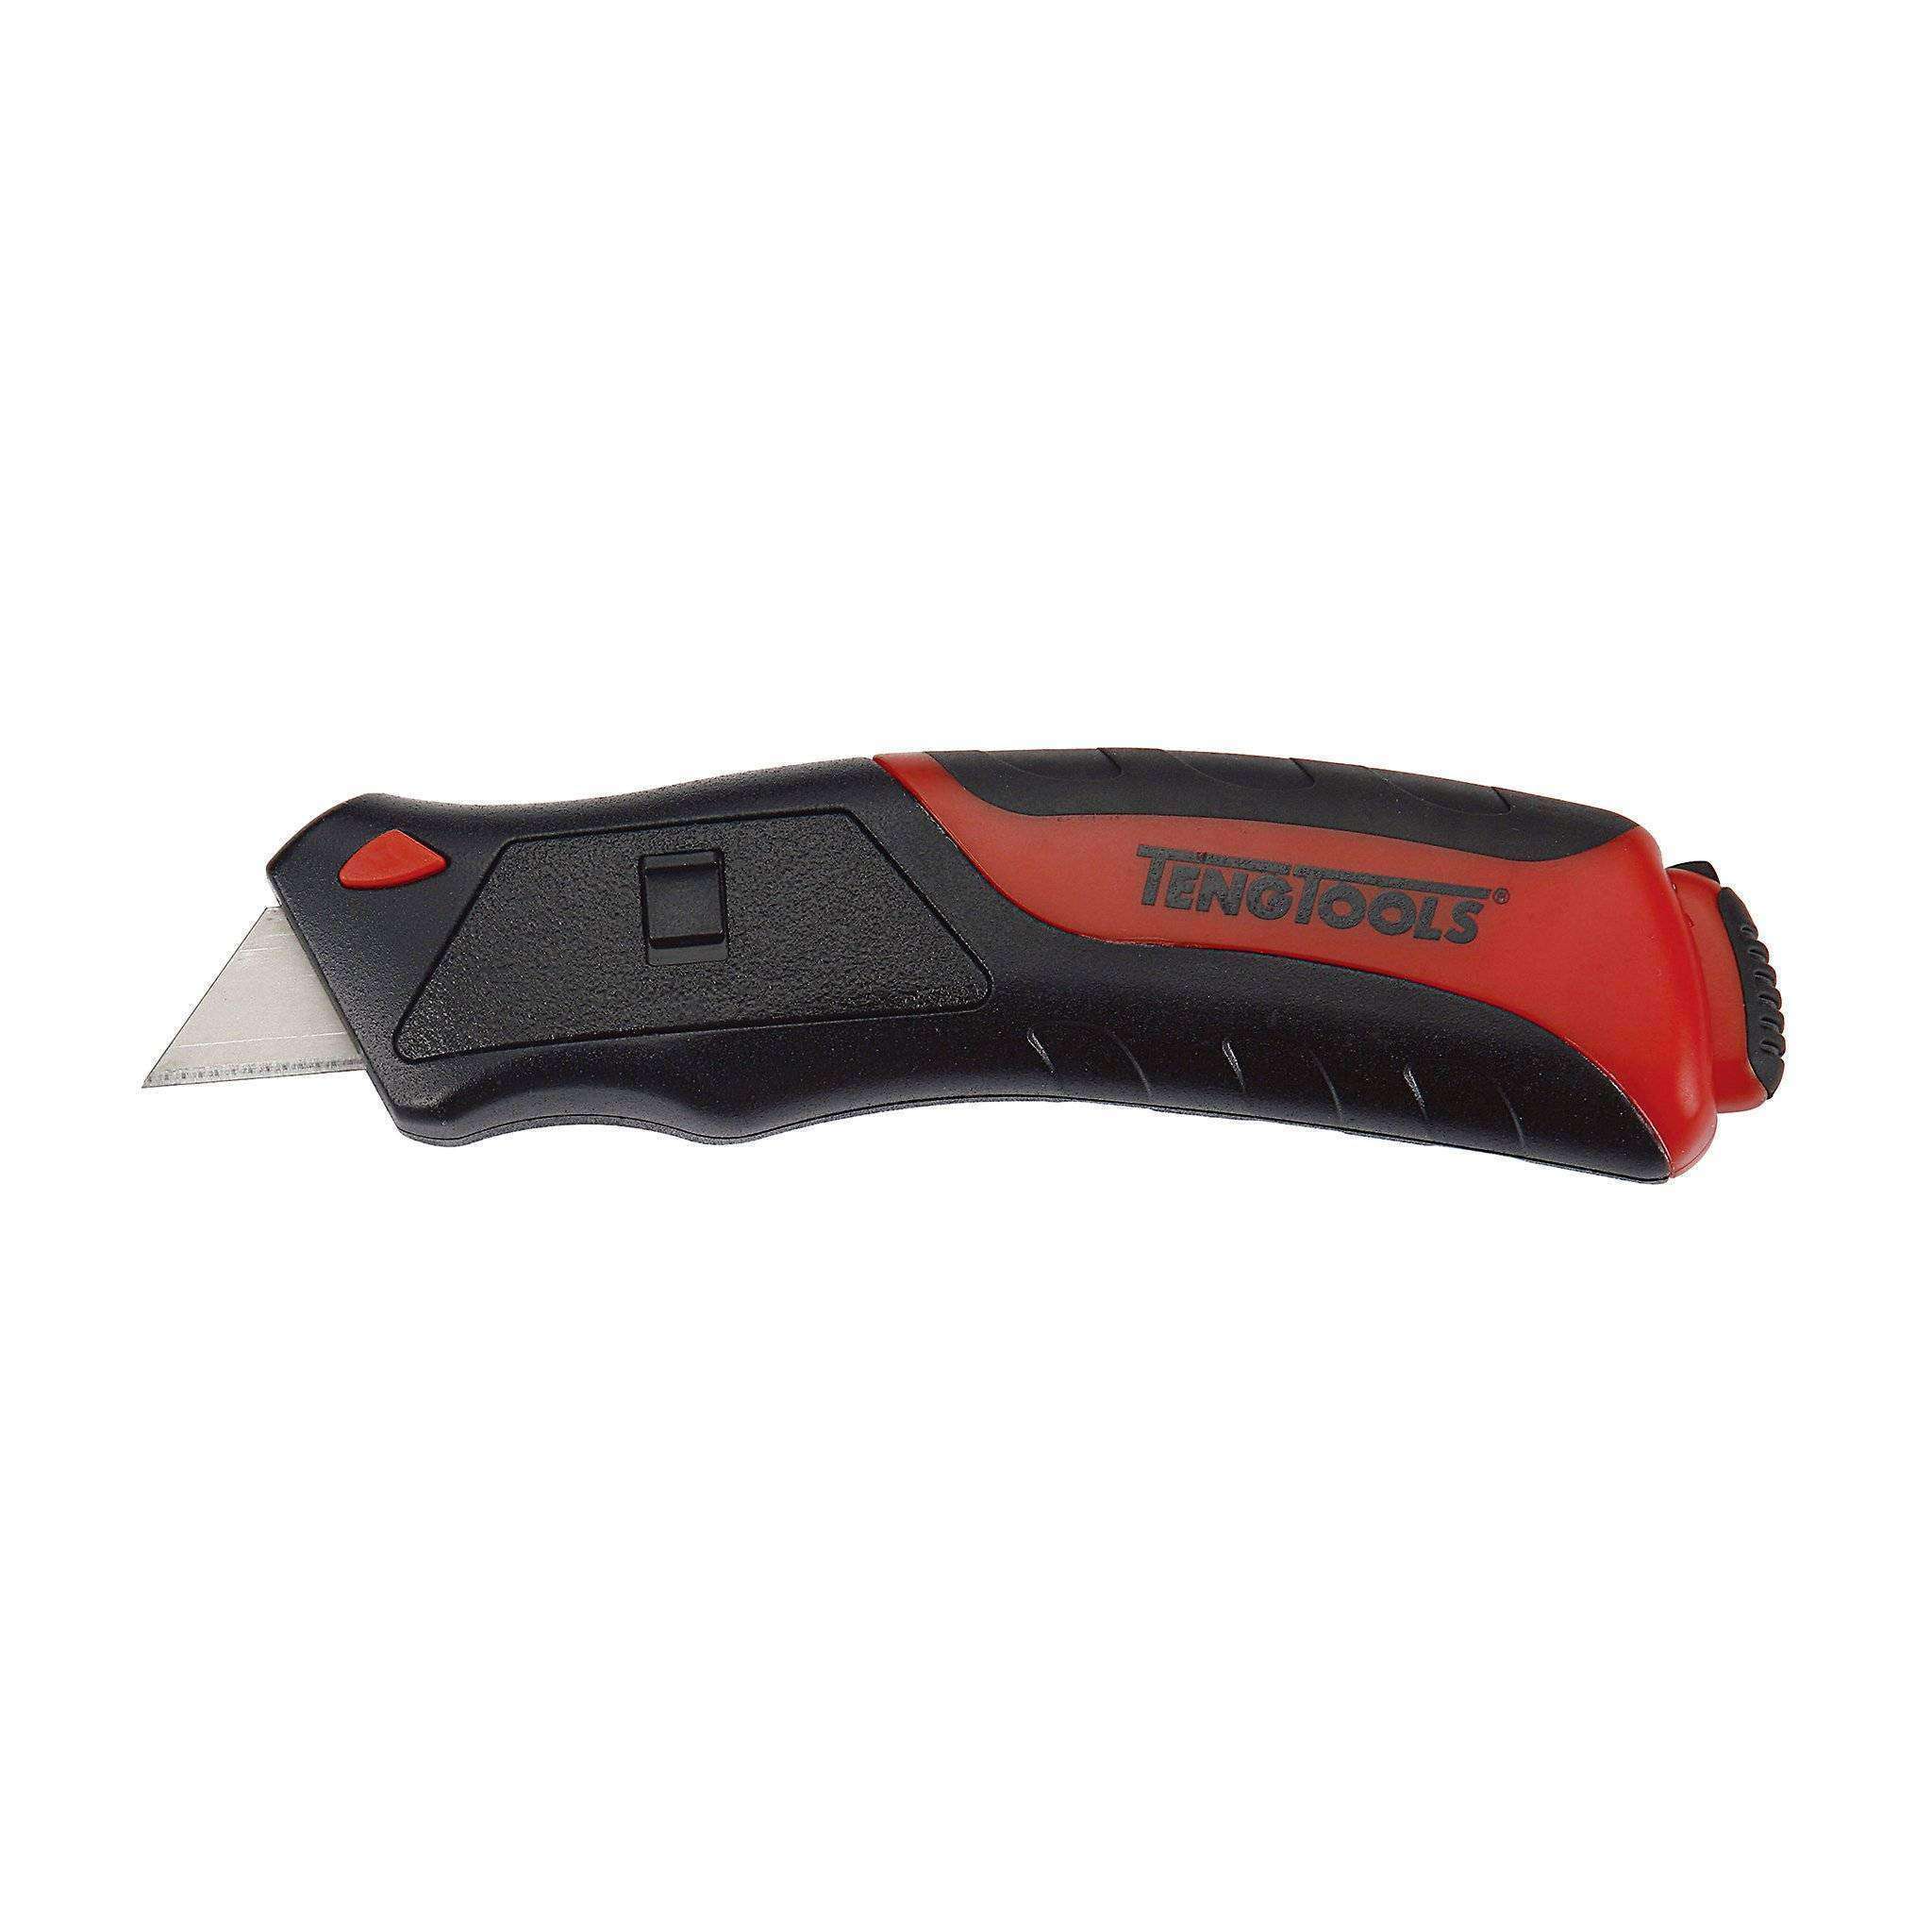 Teng Tools Non-Slip Safety Utility Knife / Box Cutters with Retractable Blade - 711